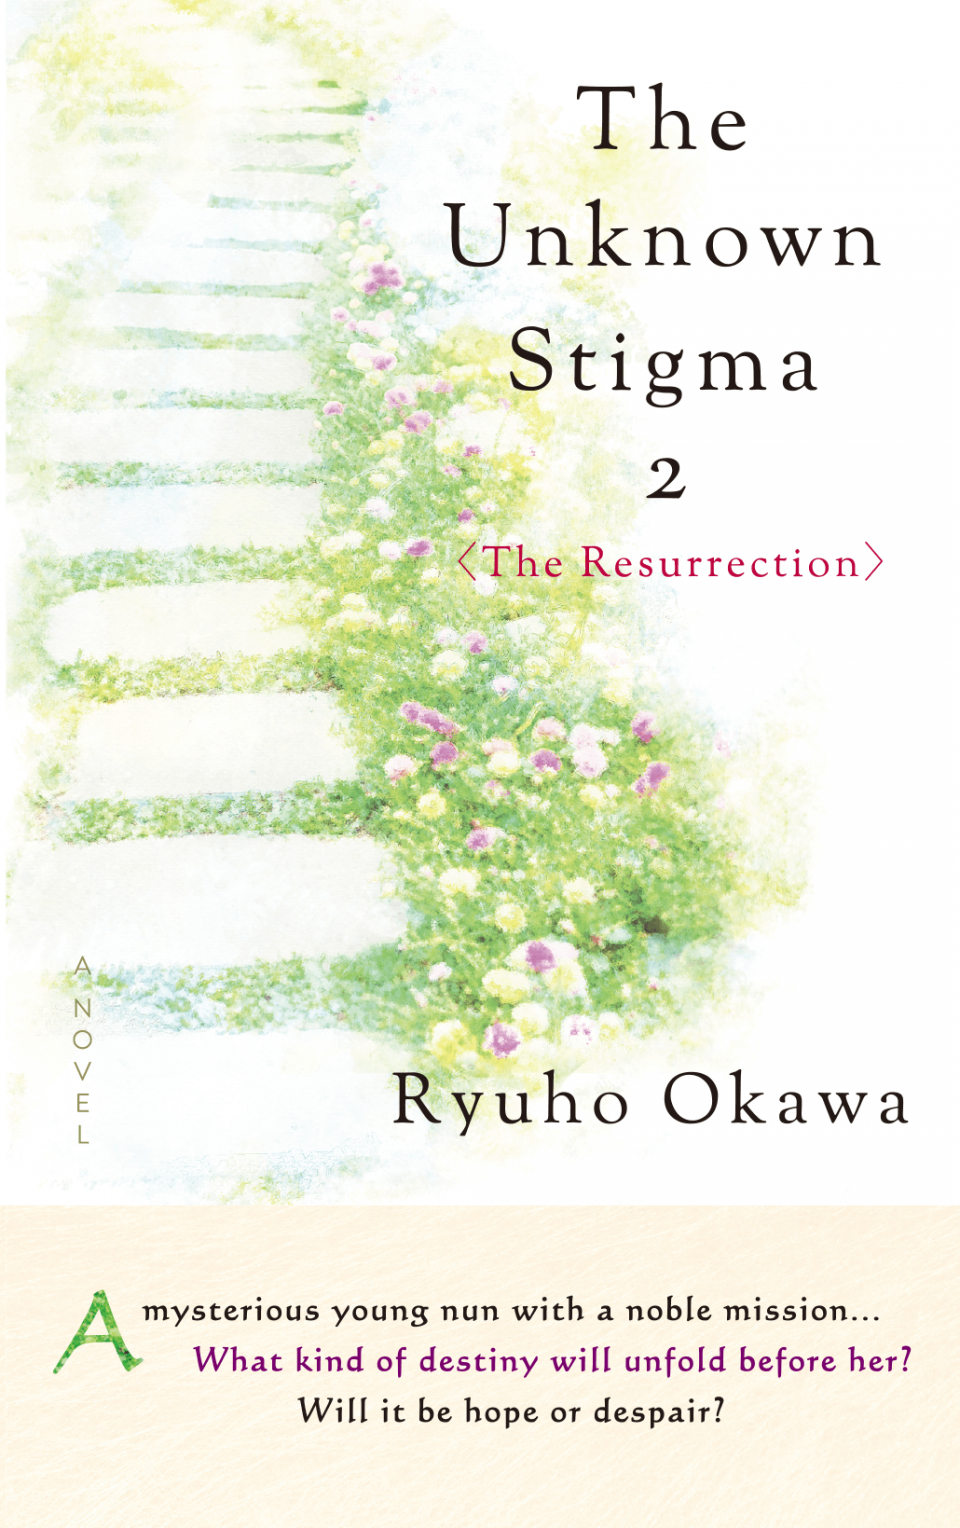 The Unknown Stigma 2＜The Resurrection＞ is out now!